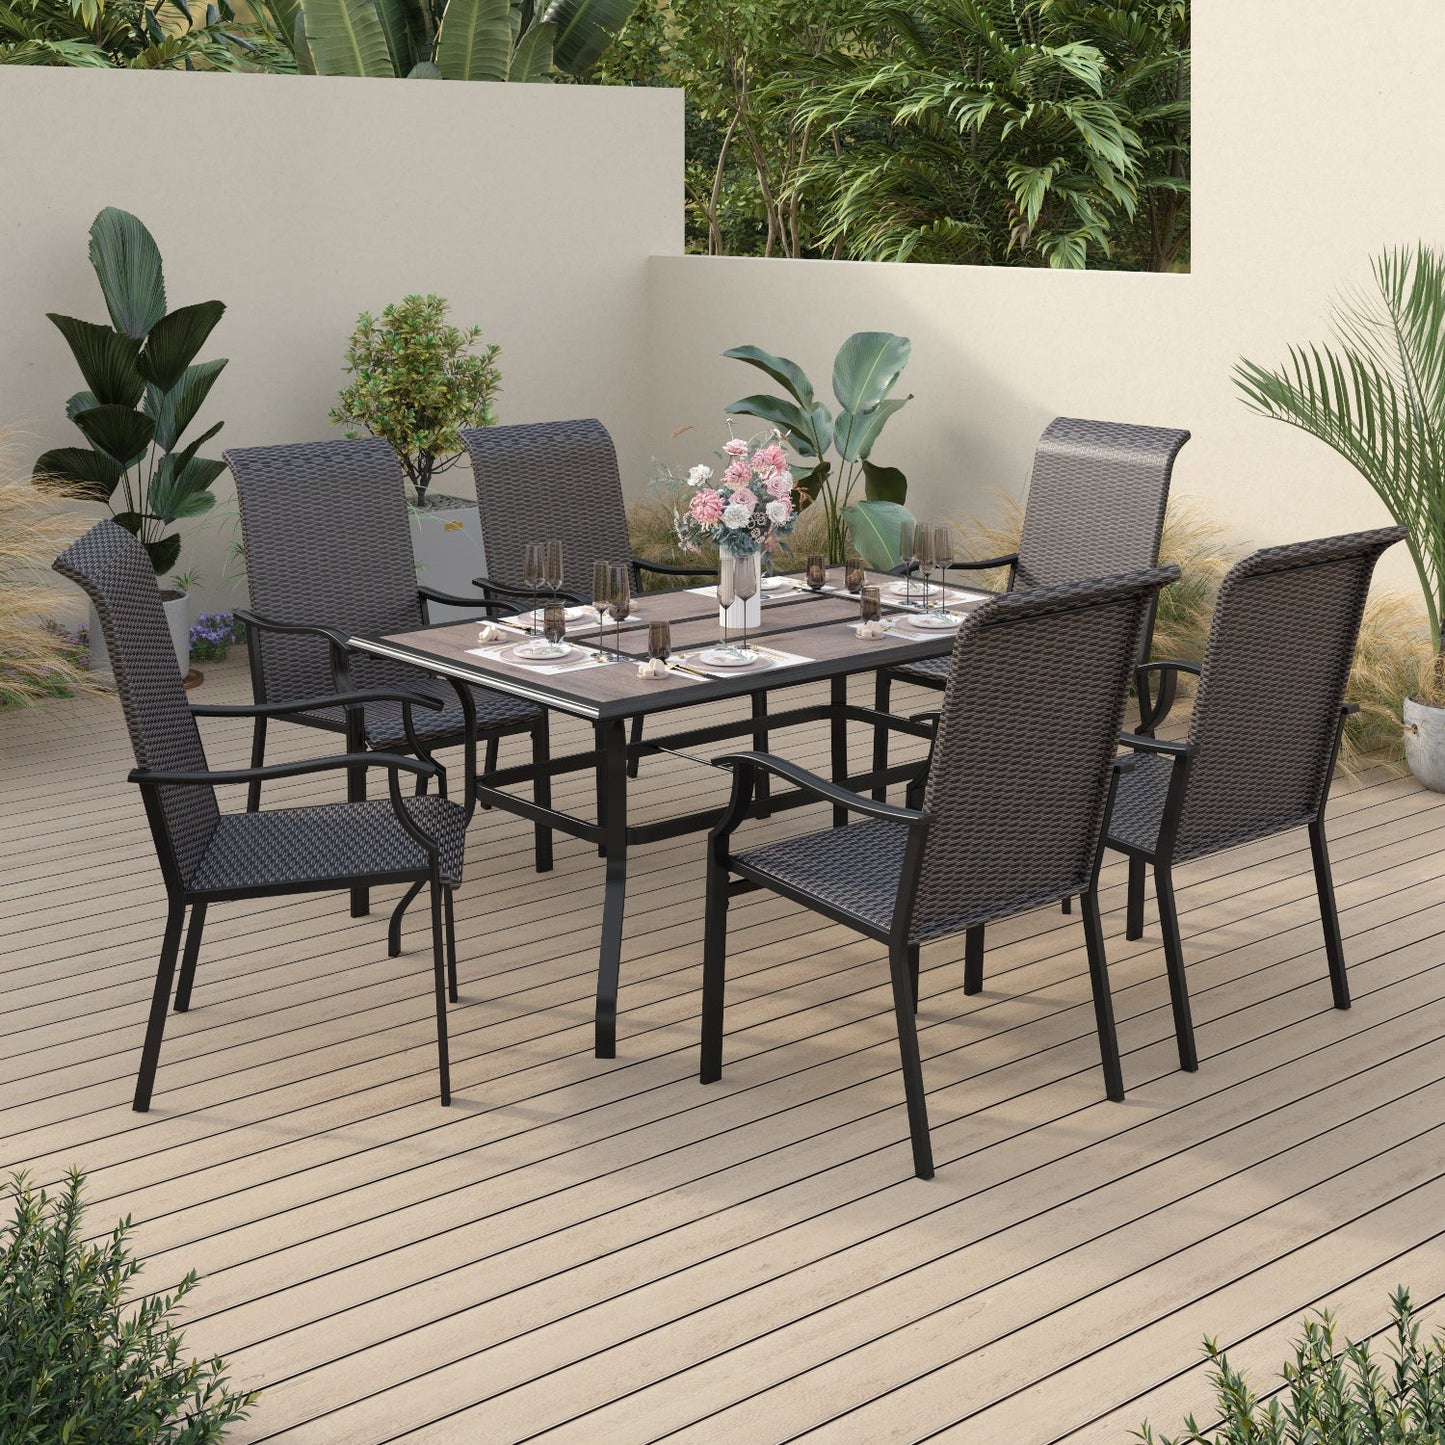 Sophia & William 7 Pieces Outdoor Patio High Back Dining Set Dining Chairs and Metal Dining Table Black